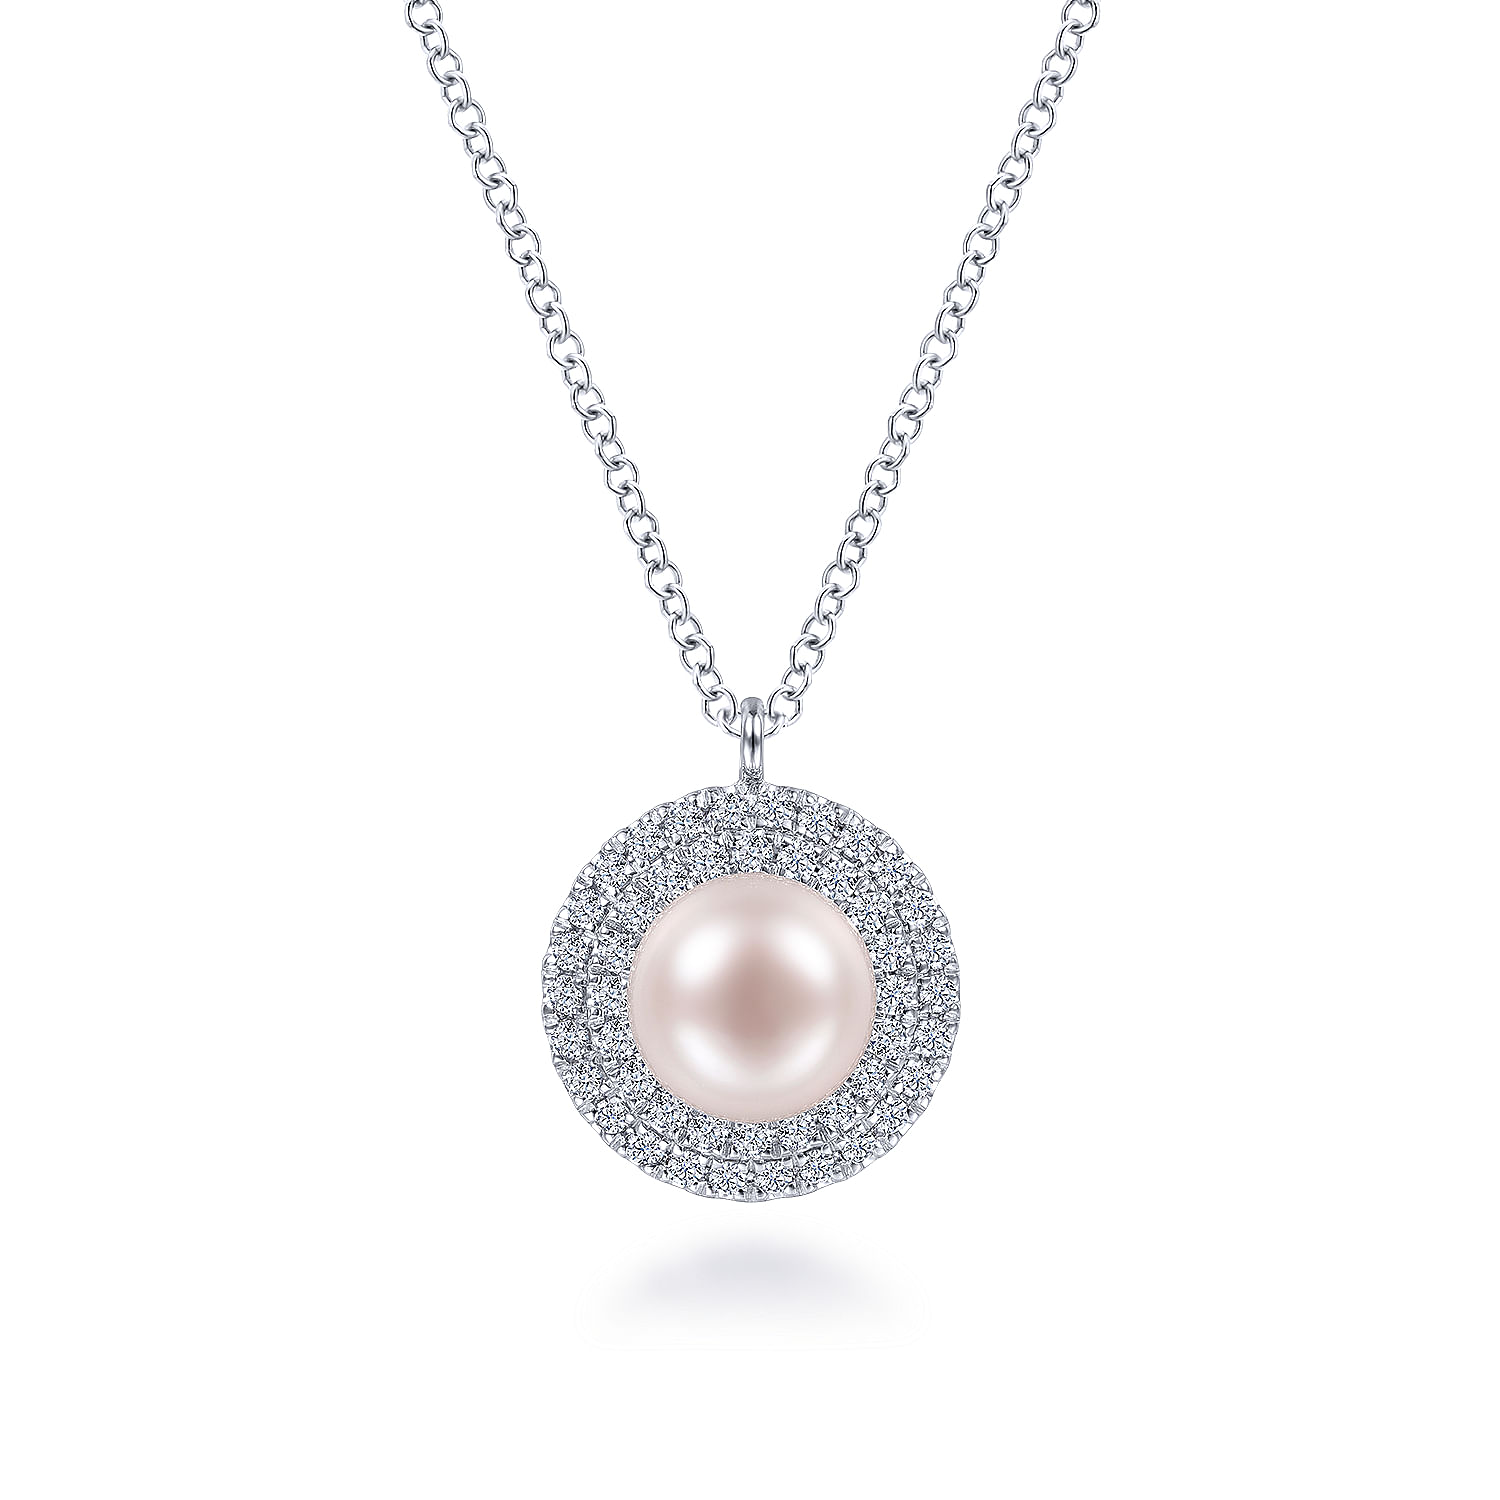 14K White Gold Round Pearl and Diamond Halo Pendant Necklace